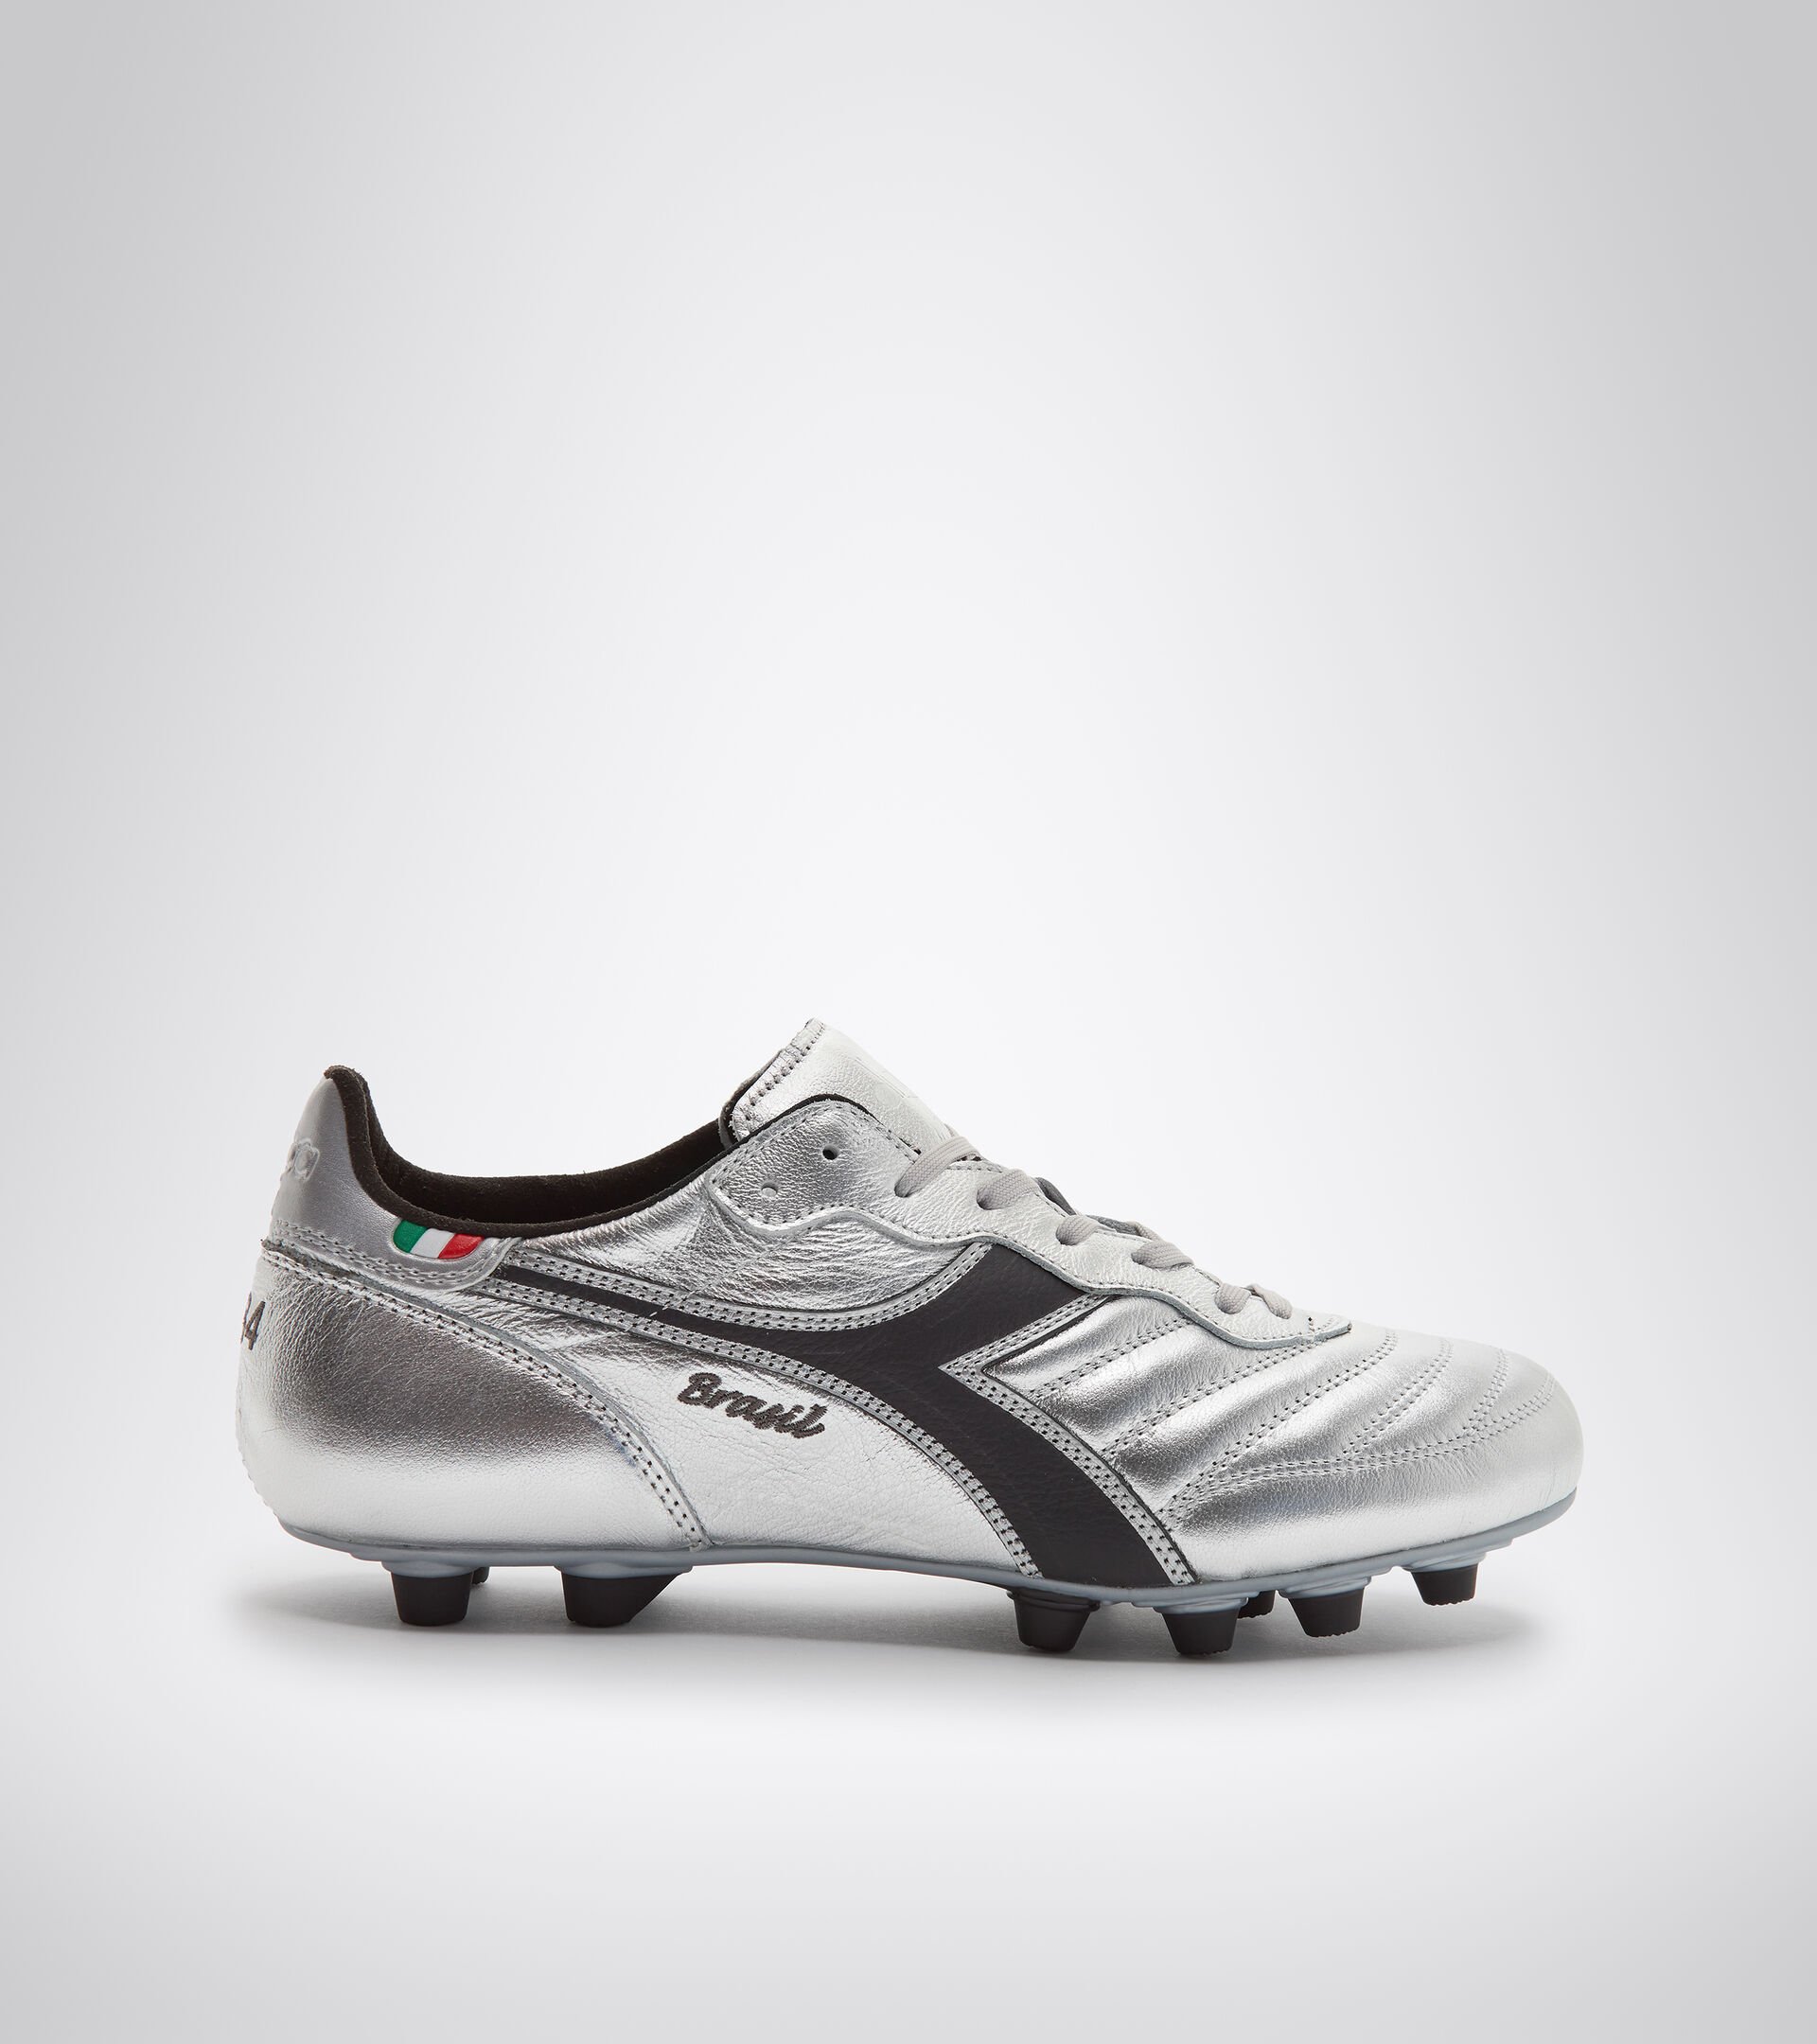 Chaussures de football pour terrains compacts - Made in Italy BRASIL ITALY OG LT+  MDPU ARGENT DD/ANTHRACITE - Diadora